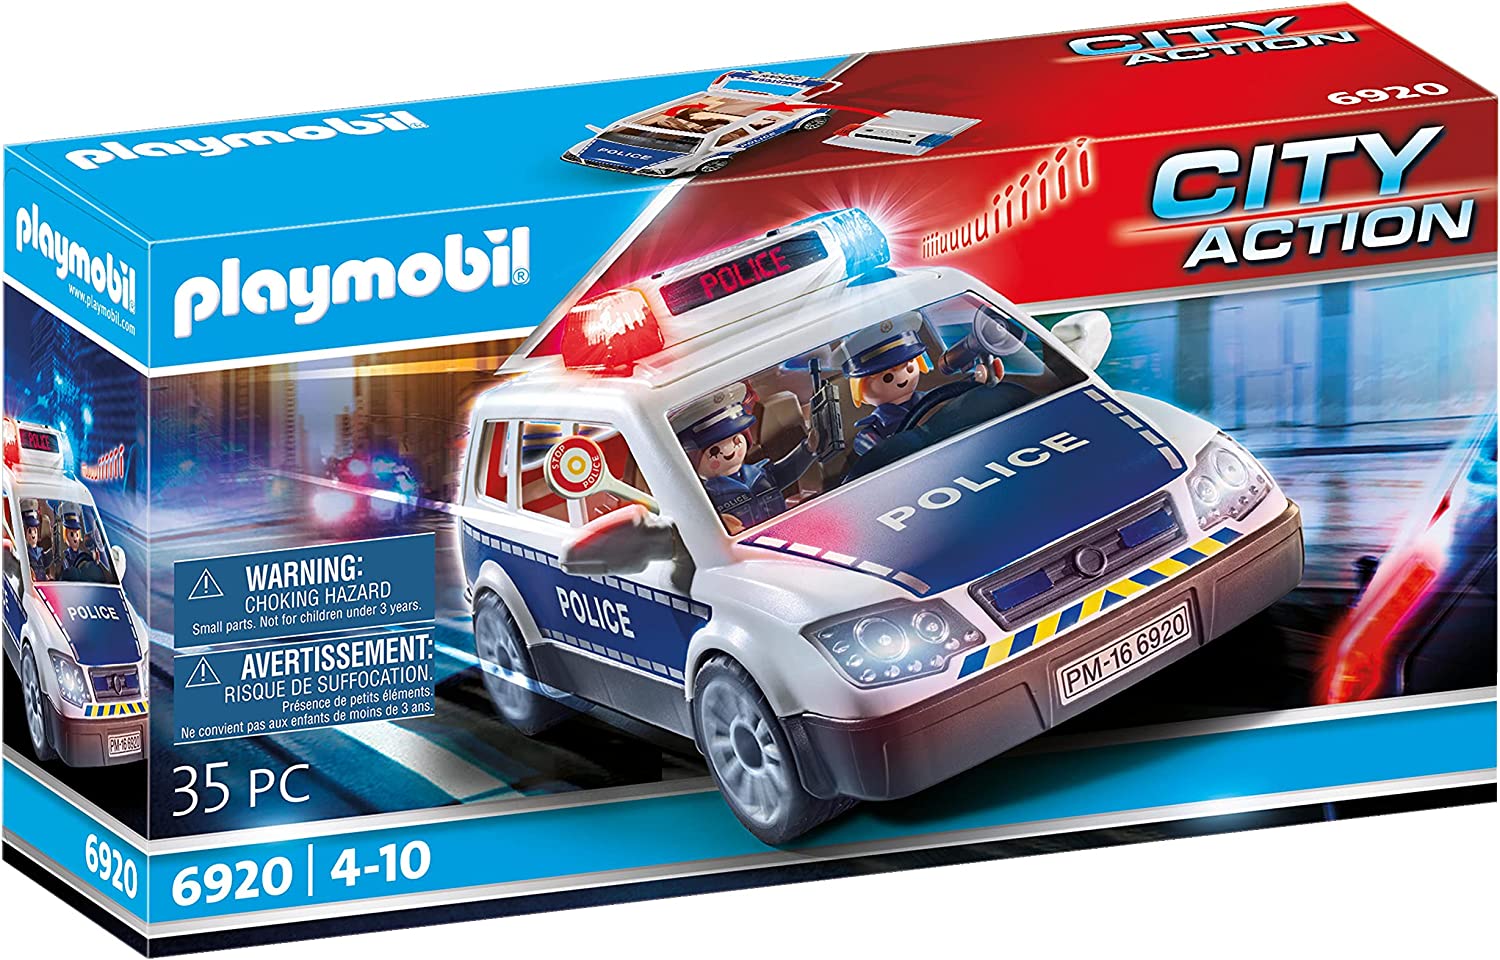 police car - playmobil city action - sounds and lights toys